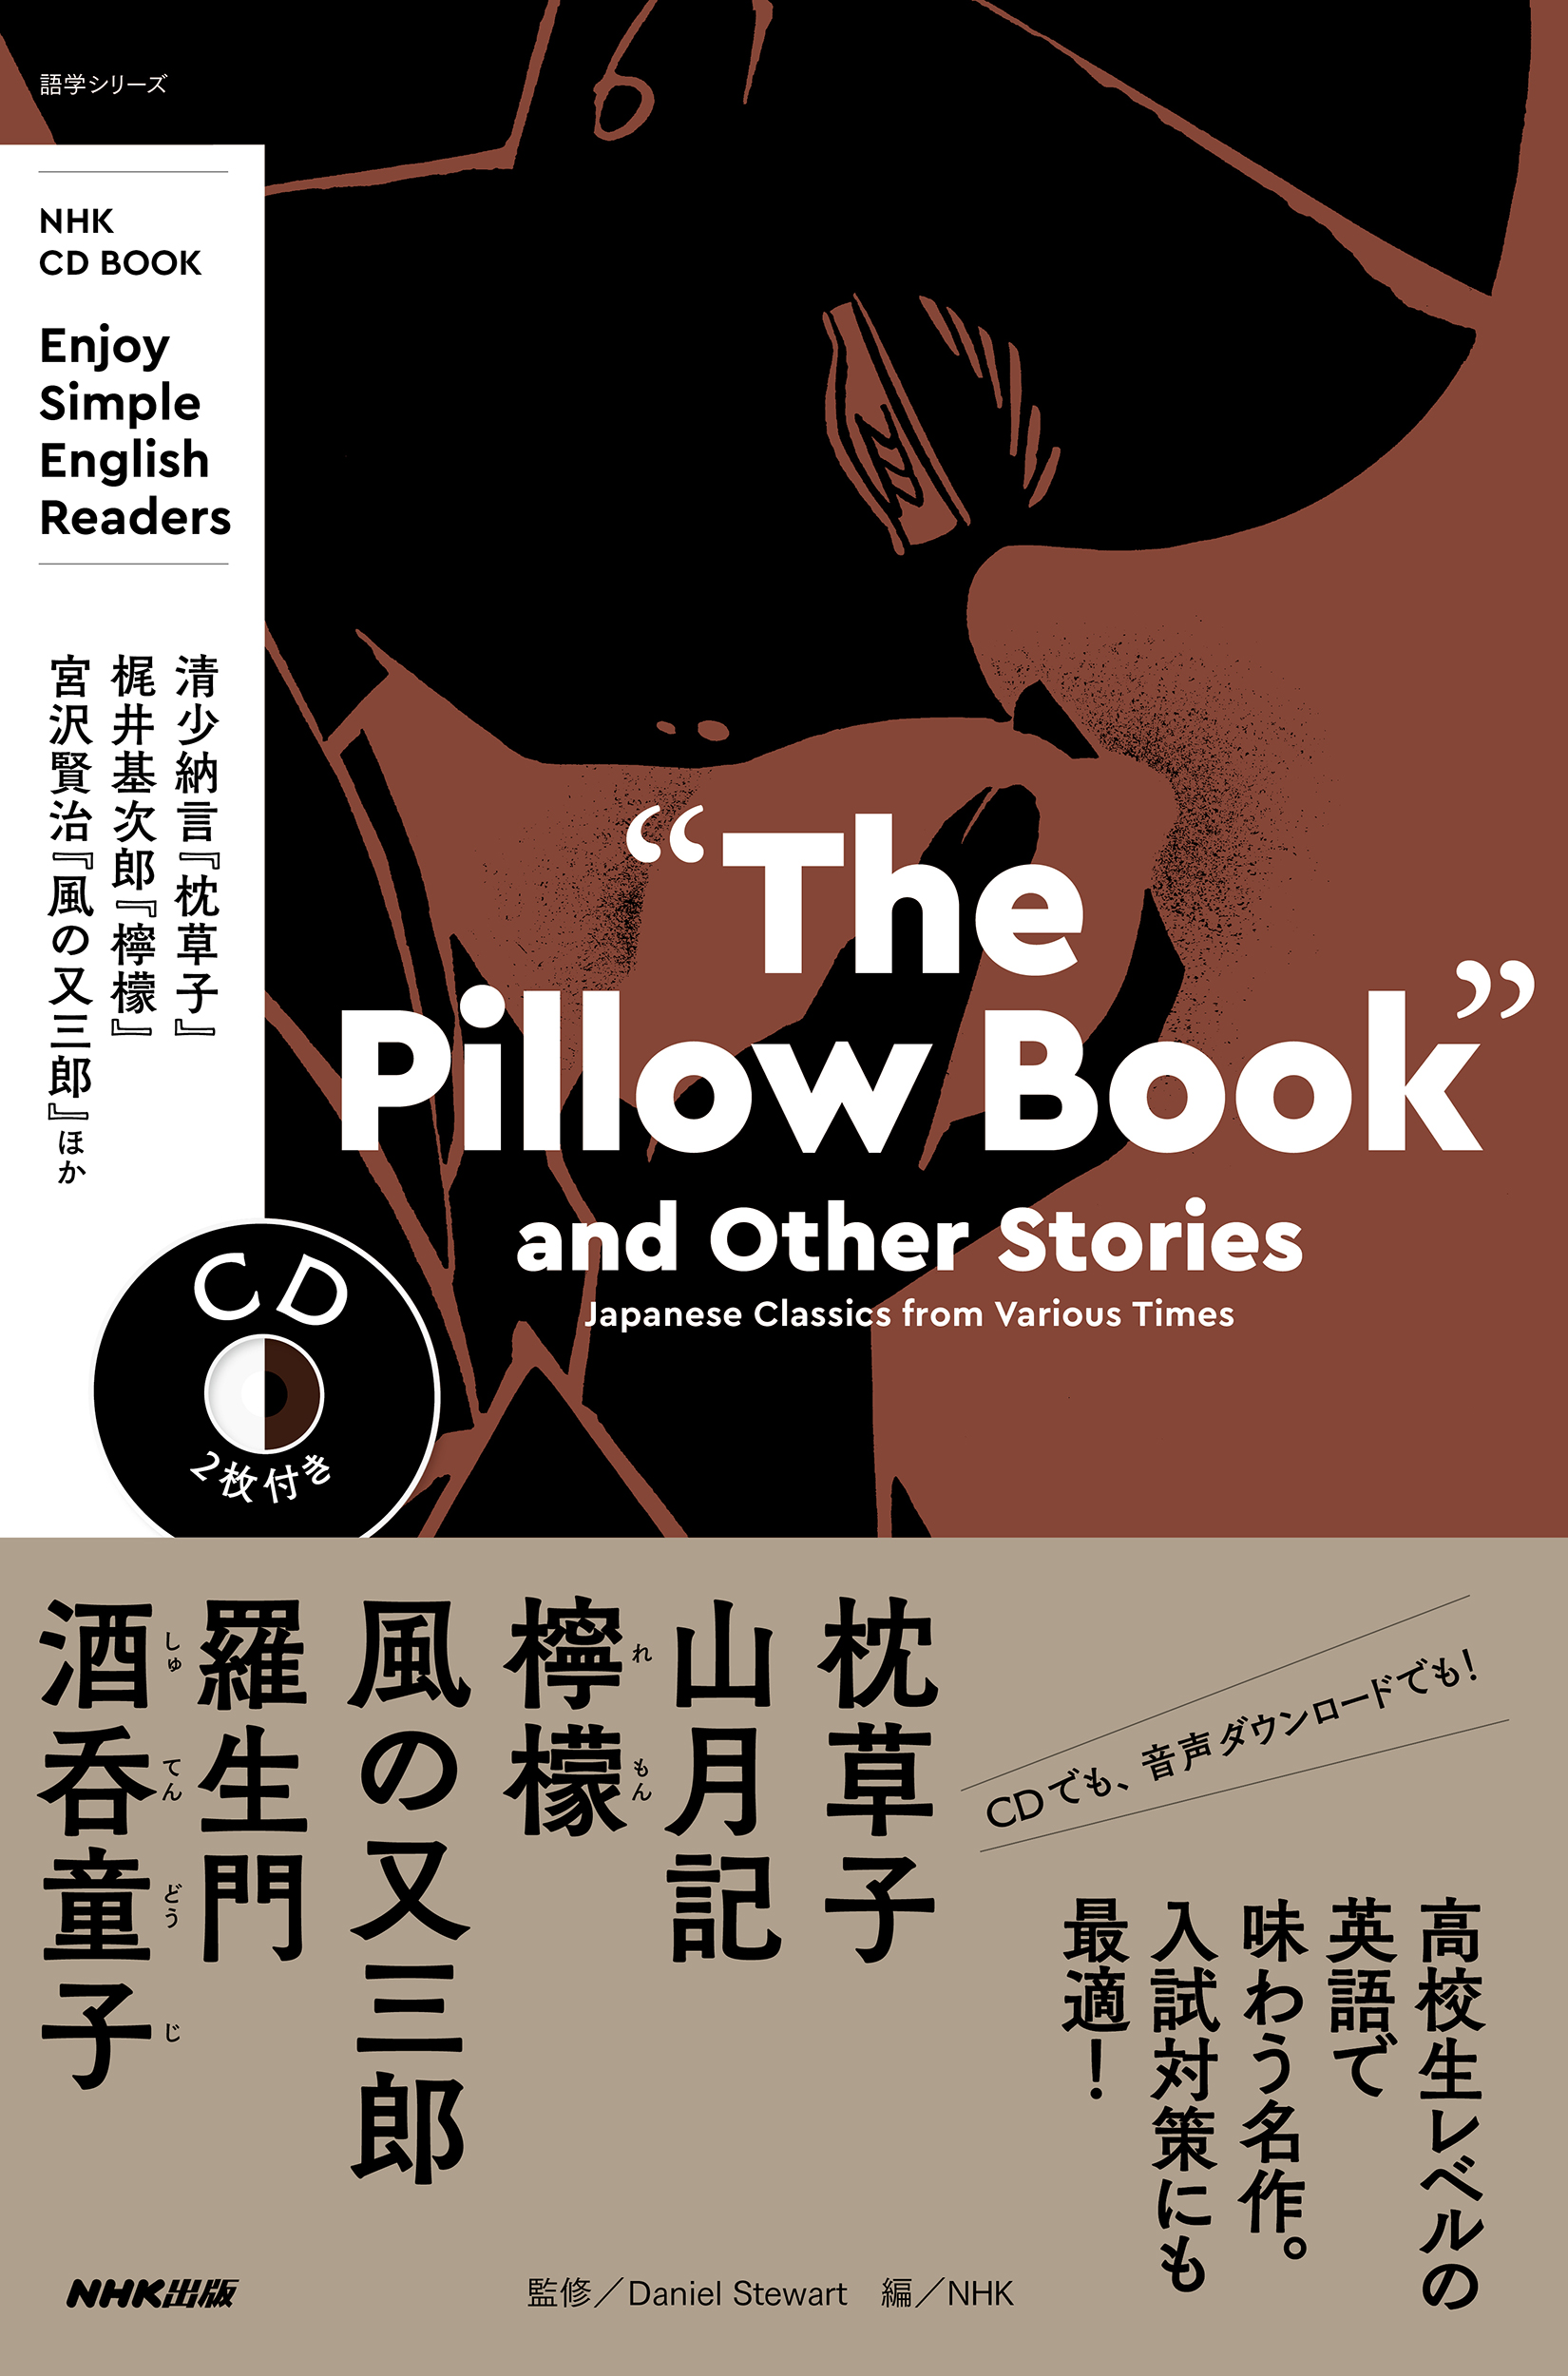 NHK　CD　BOOK　Enjoy Simple English Readers “The Pillow Book”and Other Storiesの商品画像